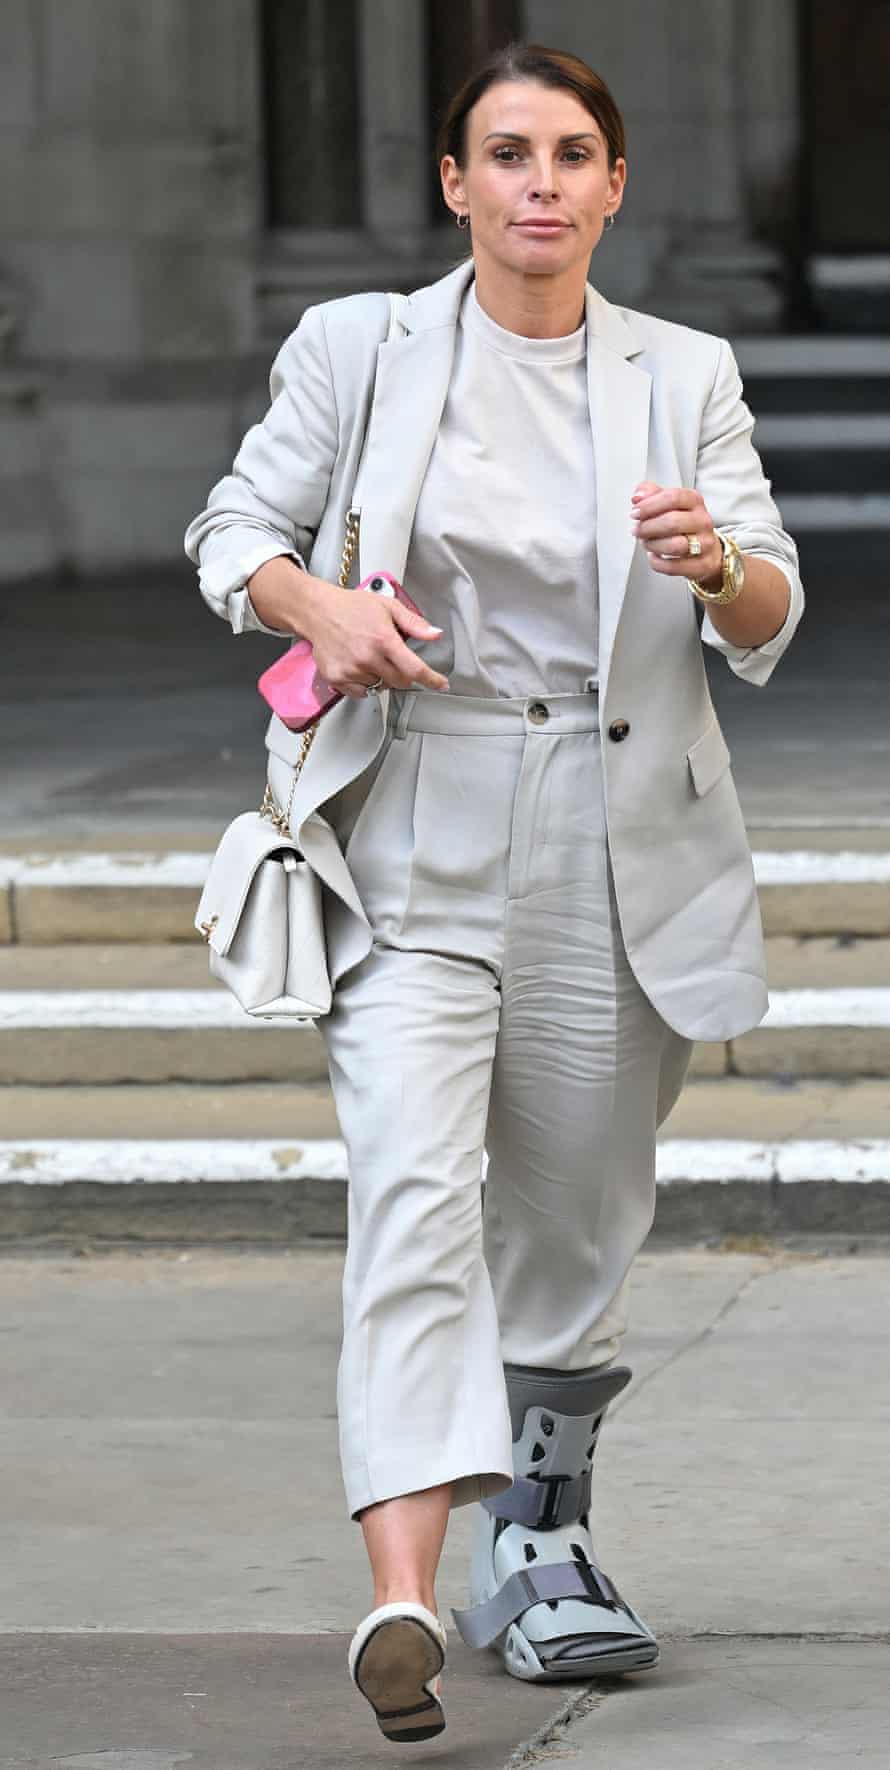 Coleen Rooney departs the Royal Courts of Justice, Strand on May 13, 2022 in London, England